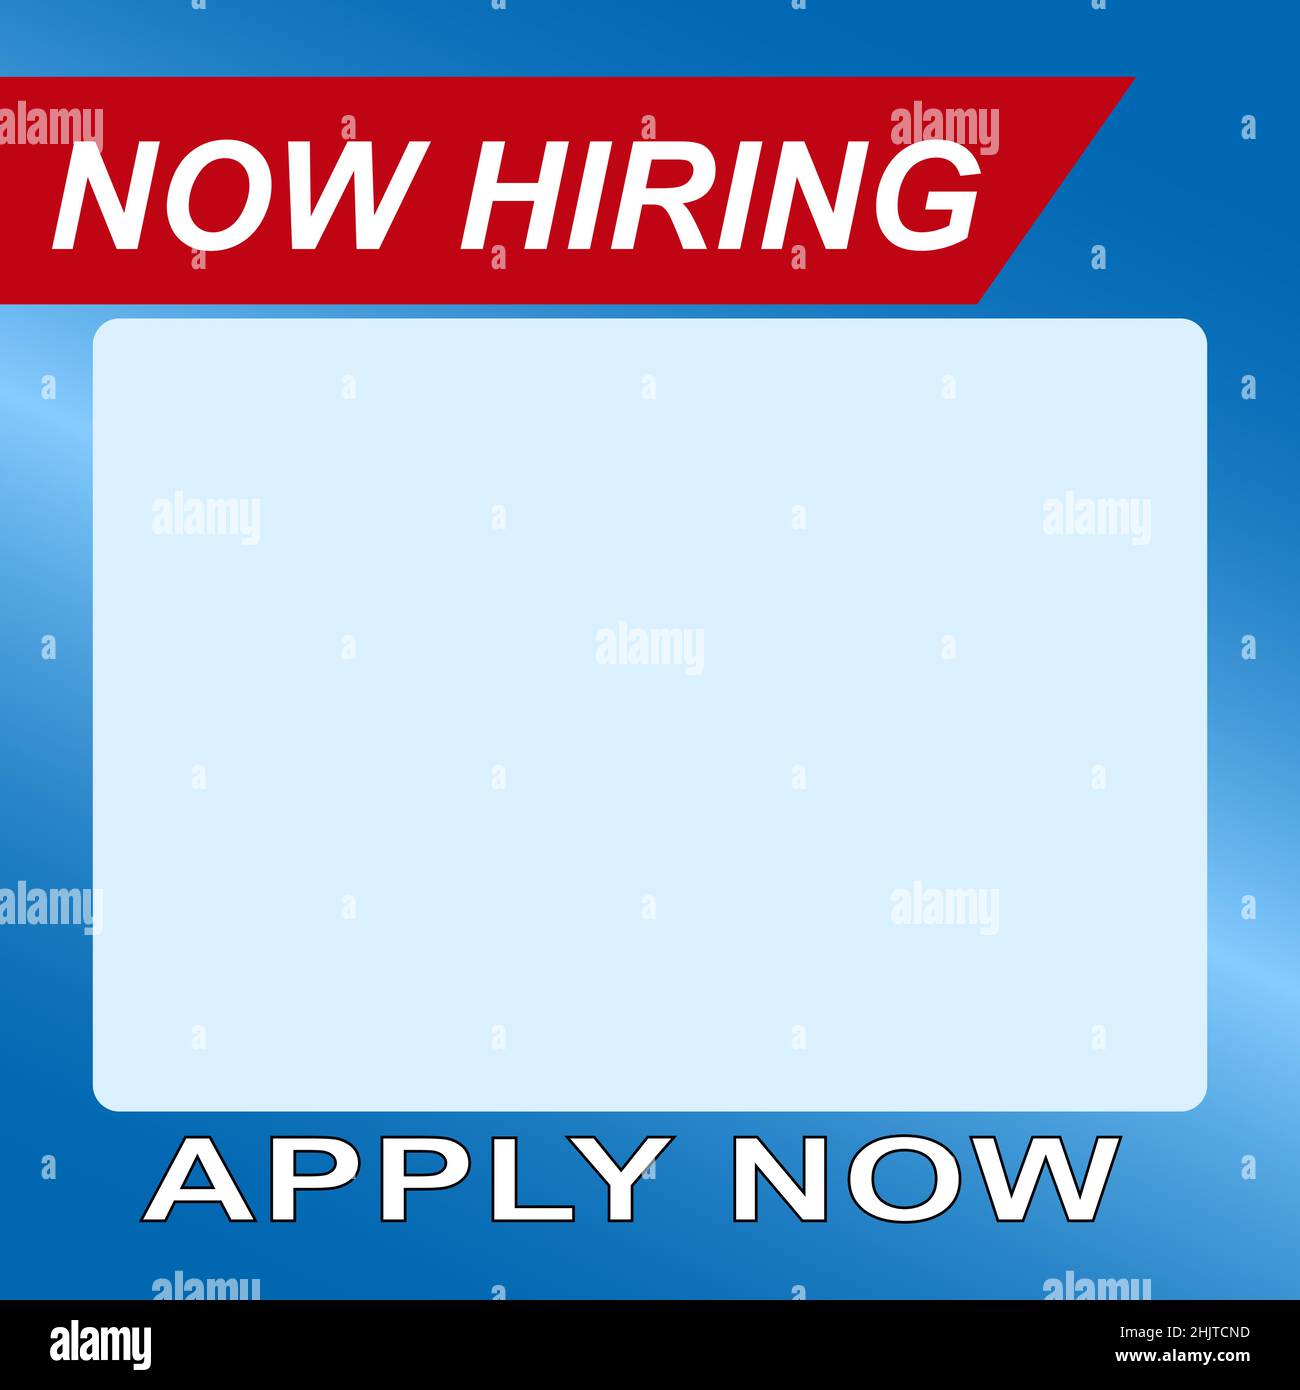 Now Hiring Apply Now square design - Vector Illustration Stock Vector